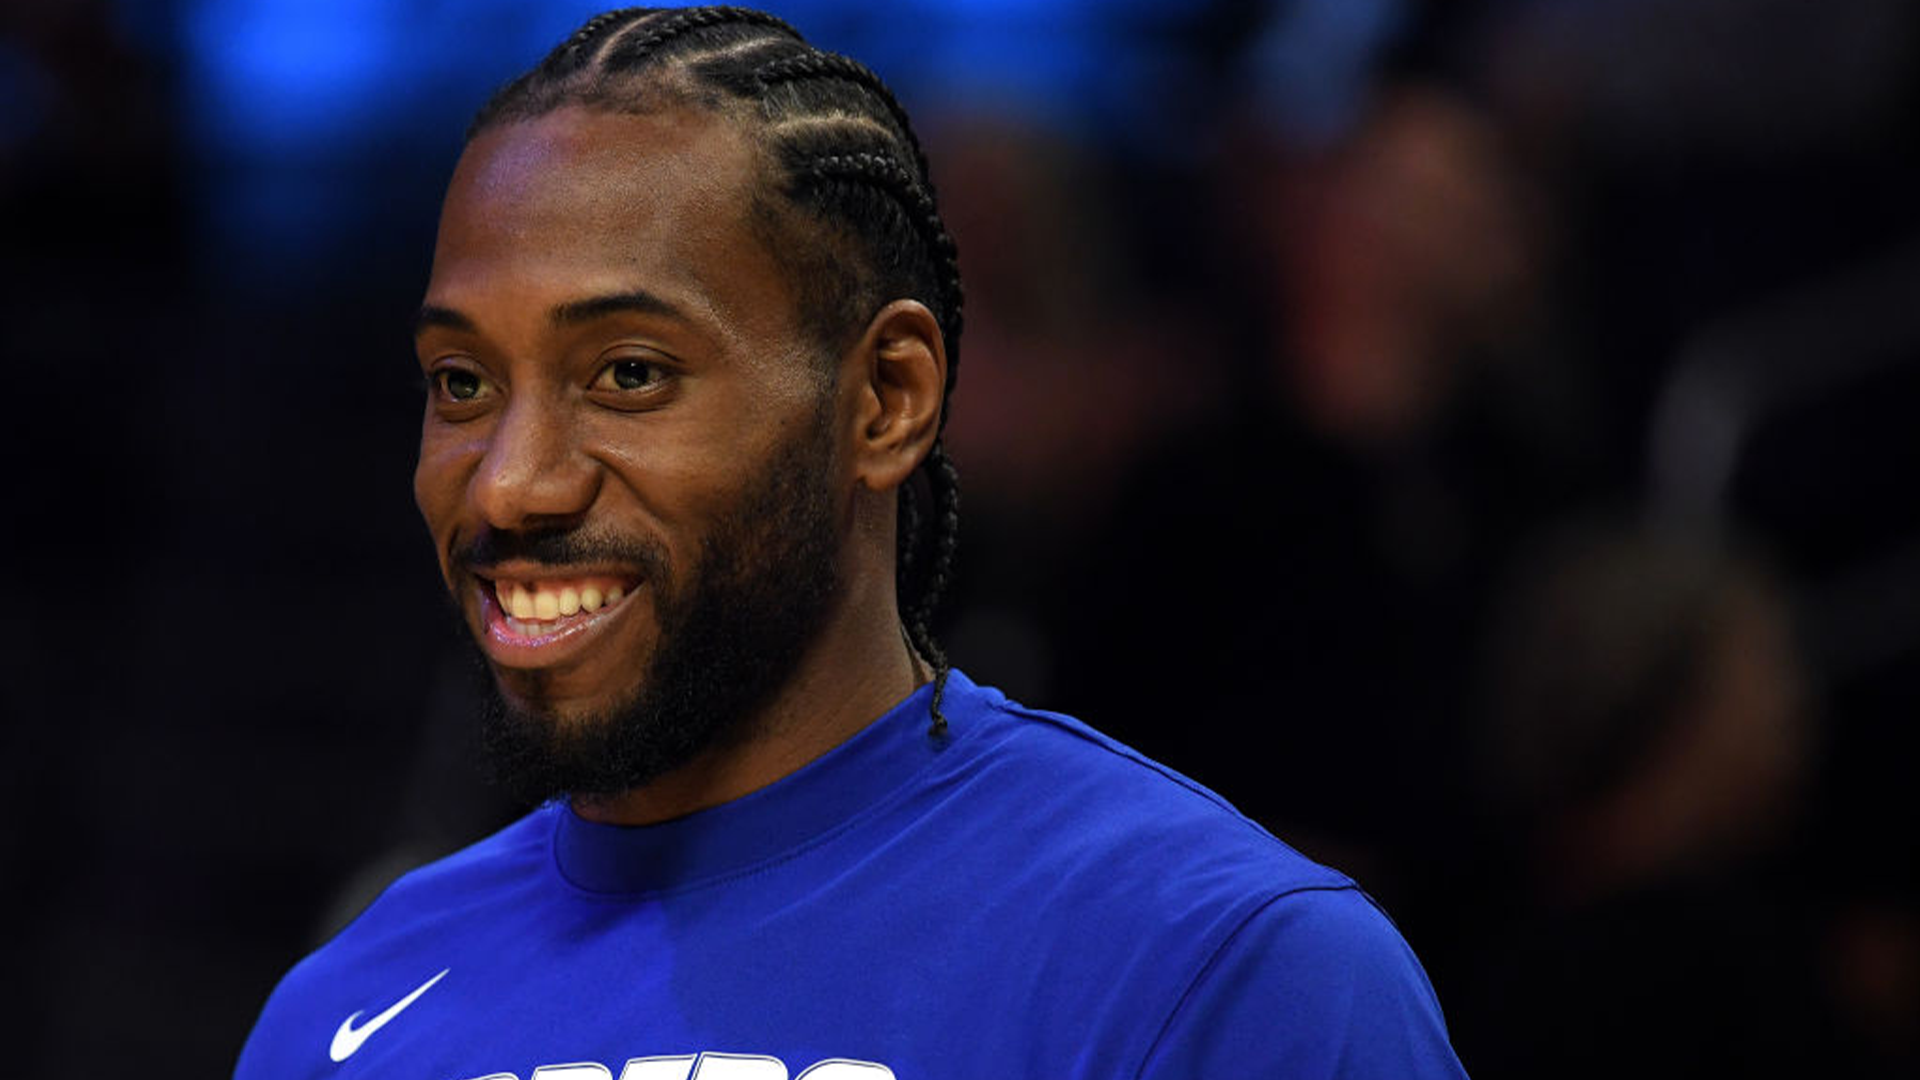 Self-Proclaimed NBA 'Fun Guy' Kawhi Leonard Has A Massive Shoe Deal With New Balance That Pays Him Over $5M A Year